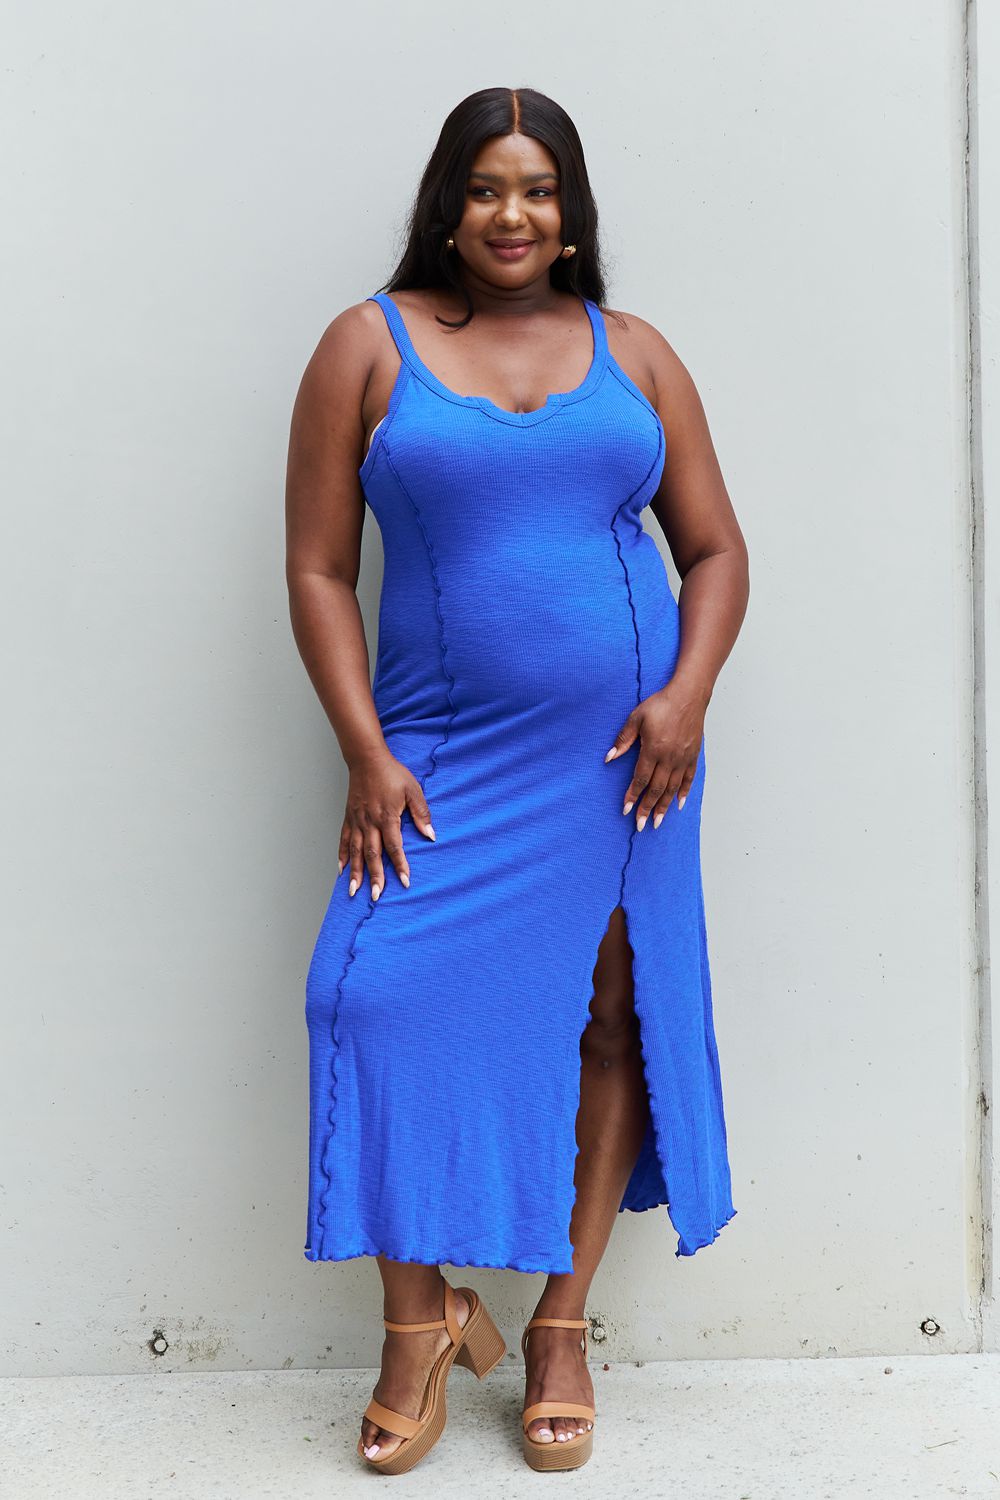 Culture Code Look At Me Notch Neck Maxi Dress with Slit in Cobalt Blue - Online Only